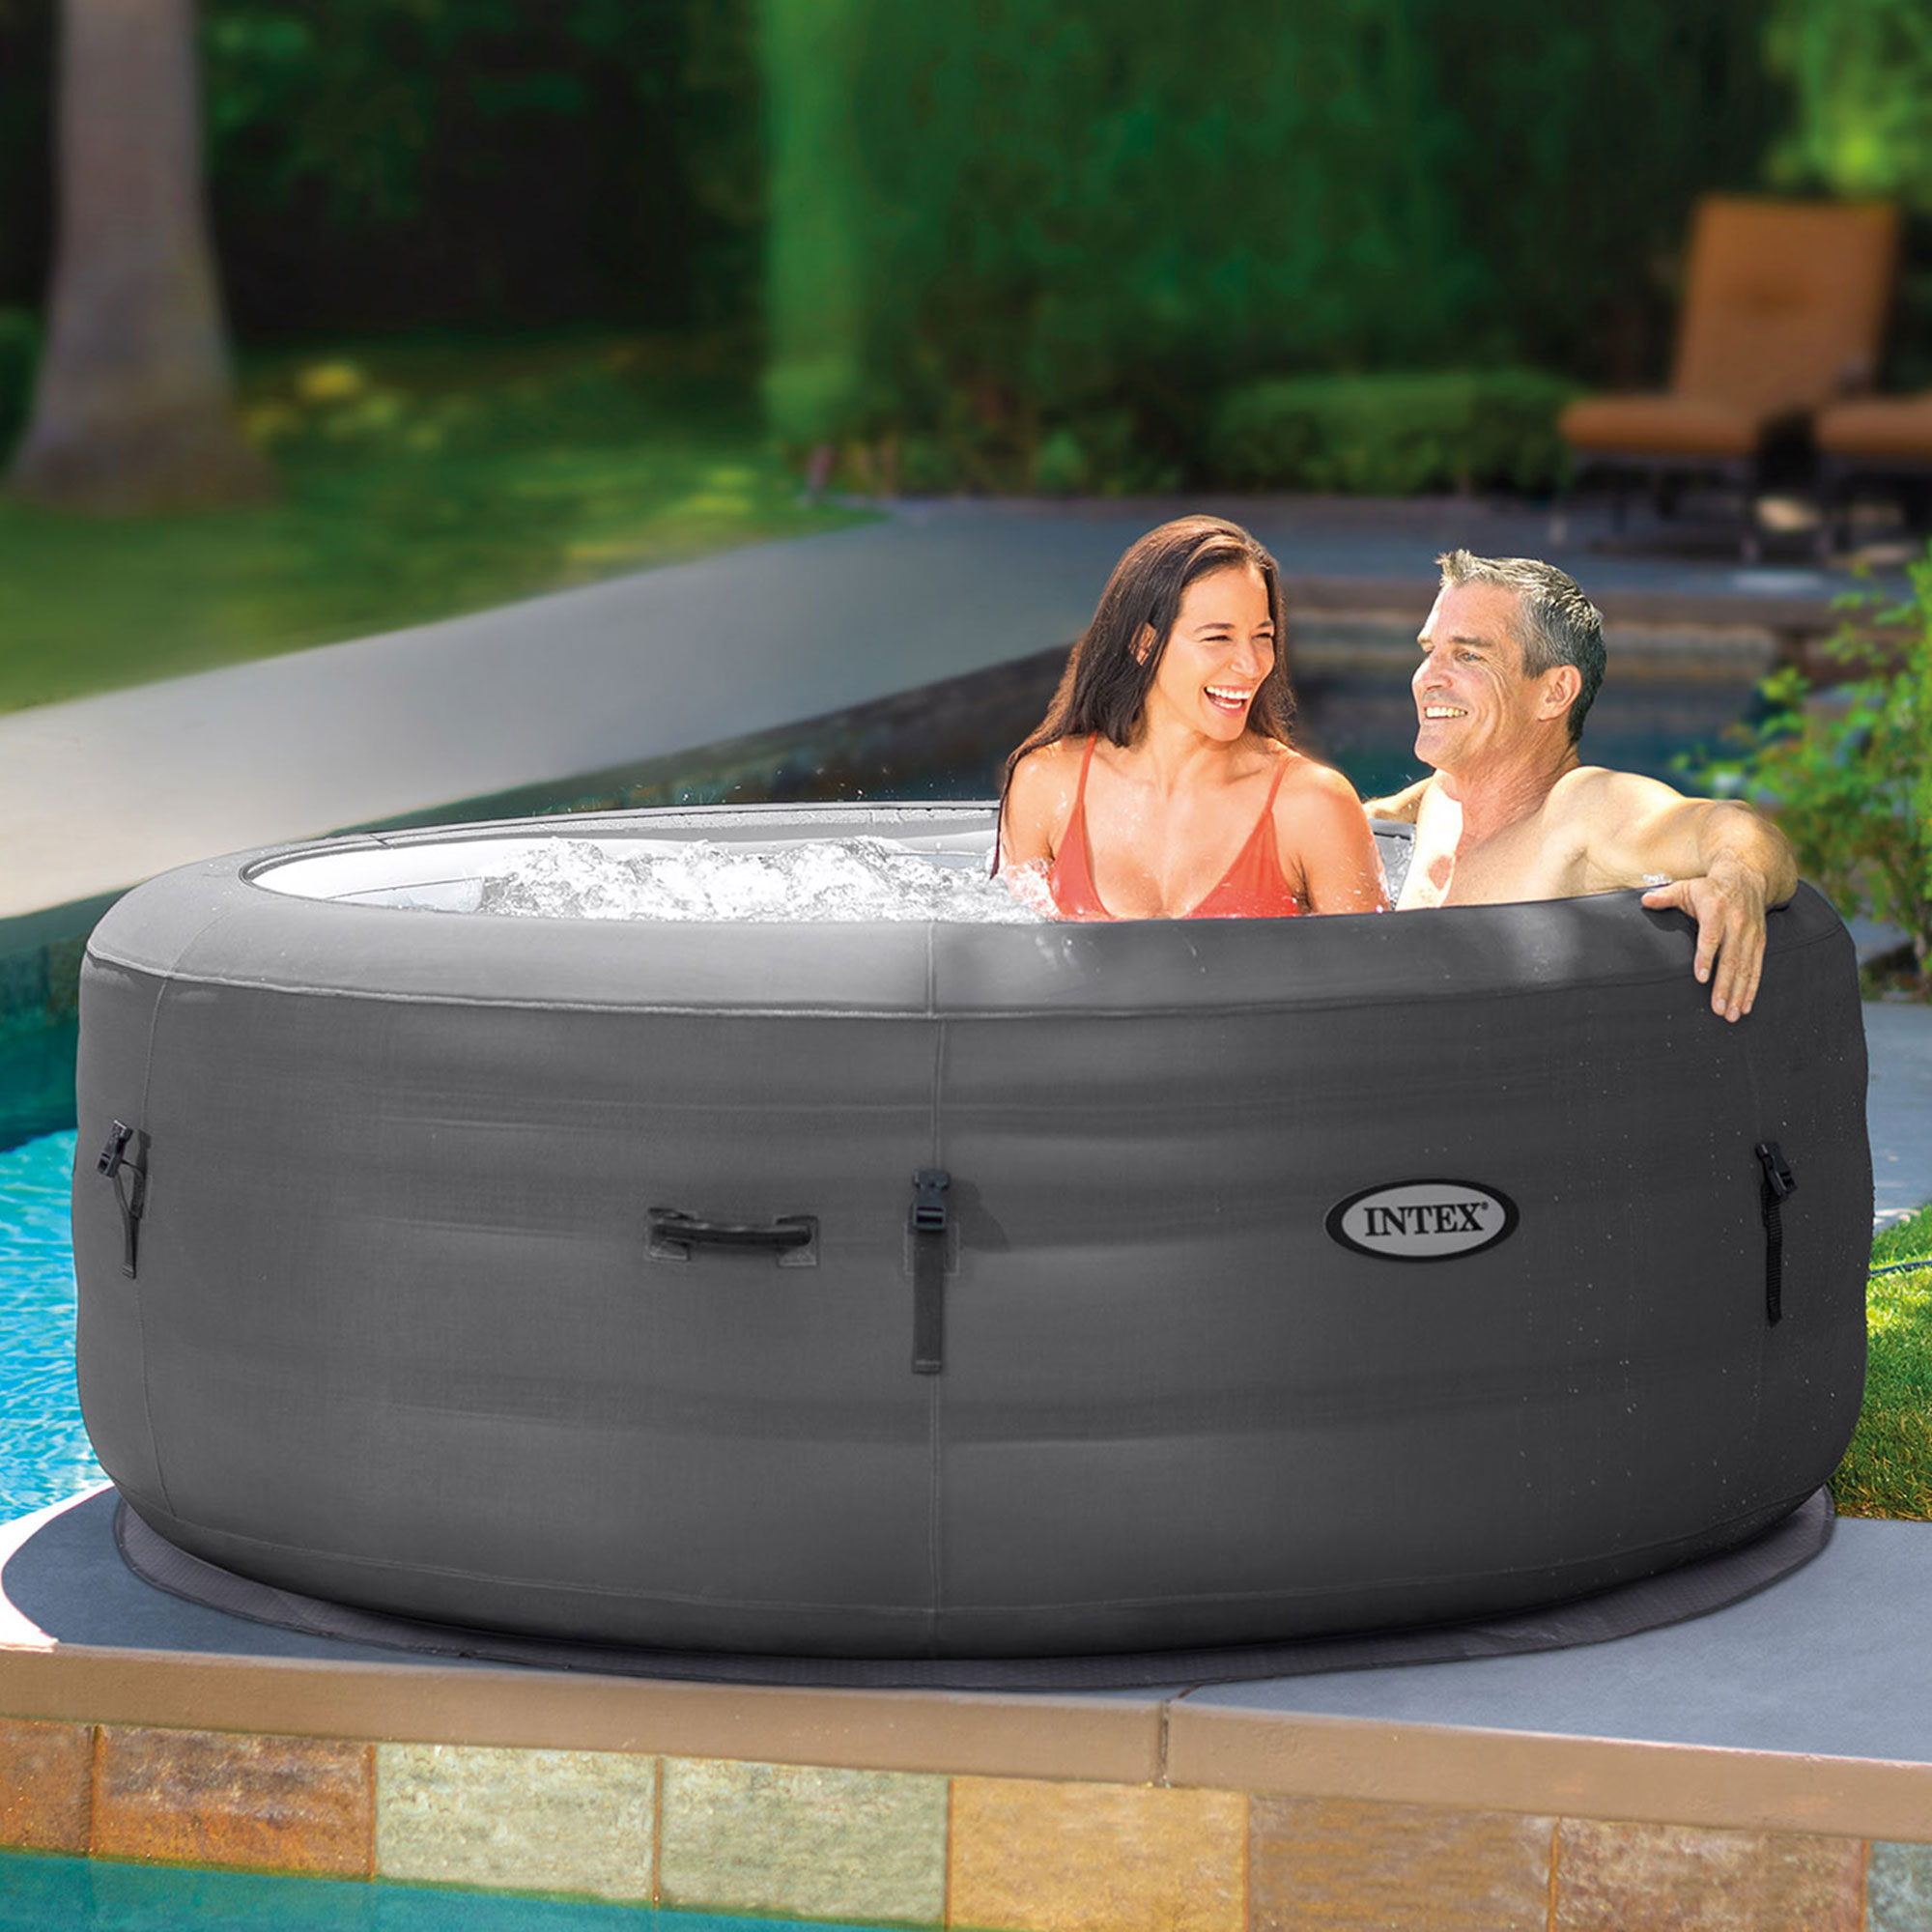 INTEX PureSpa Plus Greywood Deluxe 4-Person Inflatable Hot Tub Spa w/ Jets - image 5 of 9